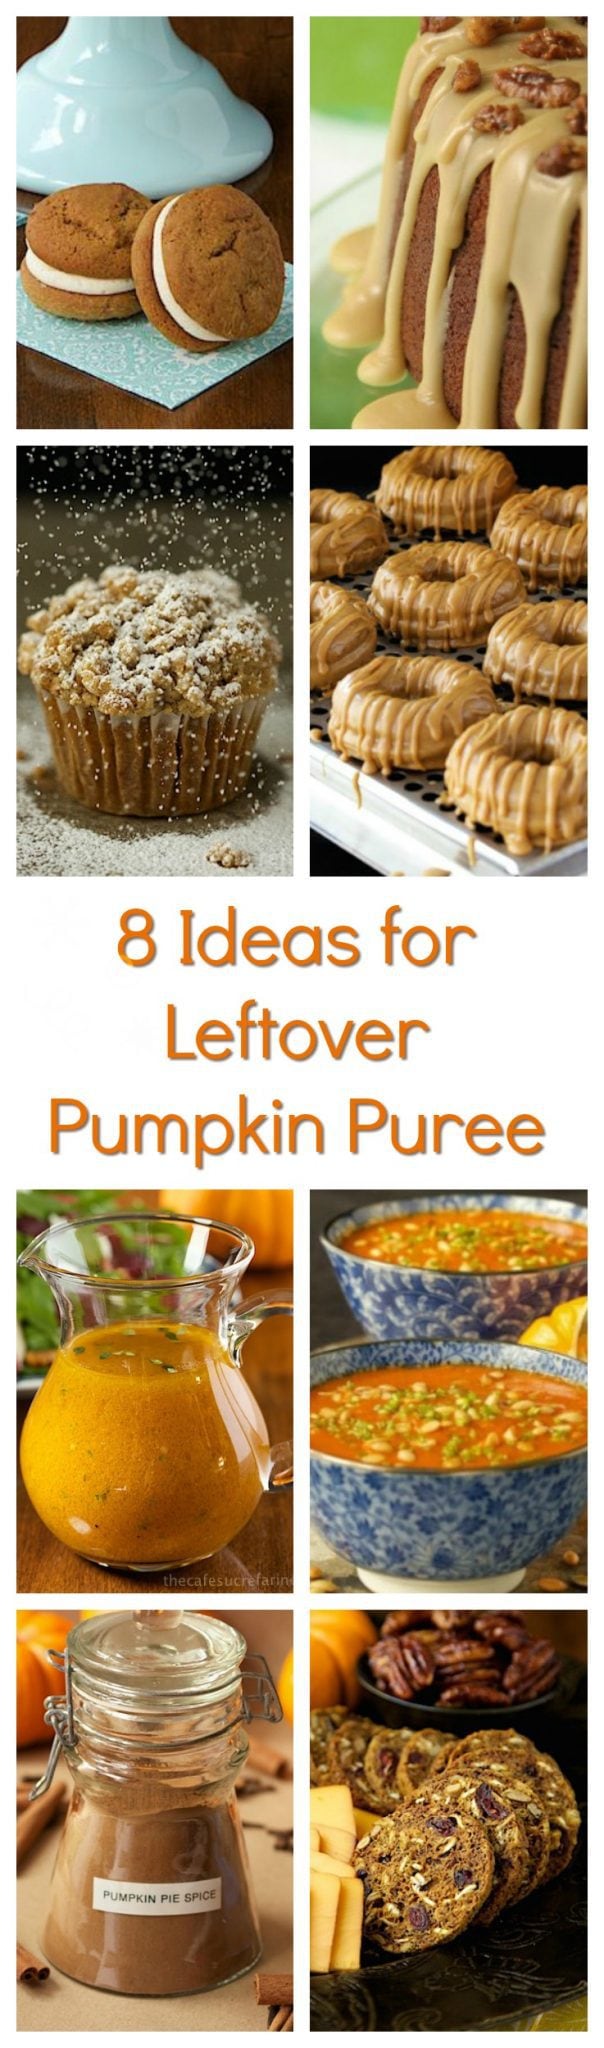 What do to with Leftover Pumpkin Puree - a few fun ideas to help use up that extra pumpkin that always seems to be leftover.